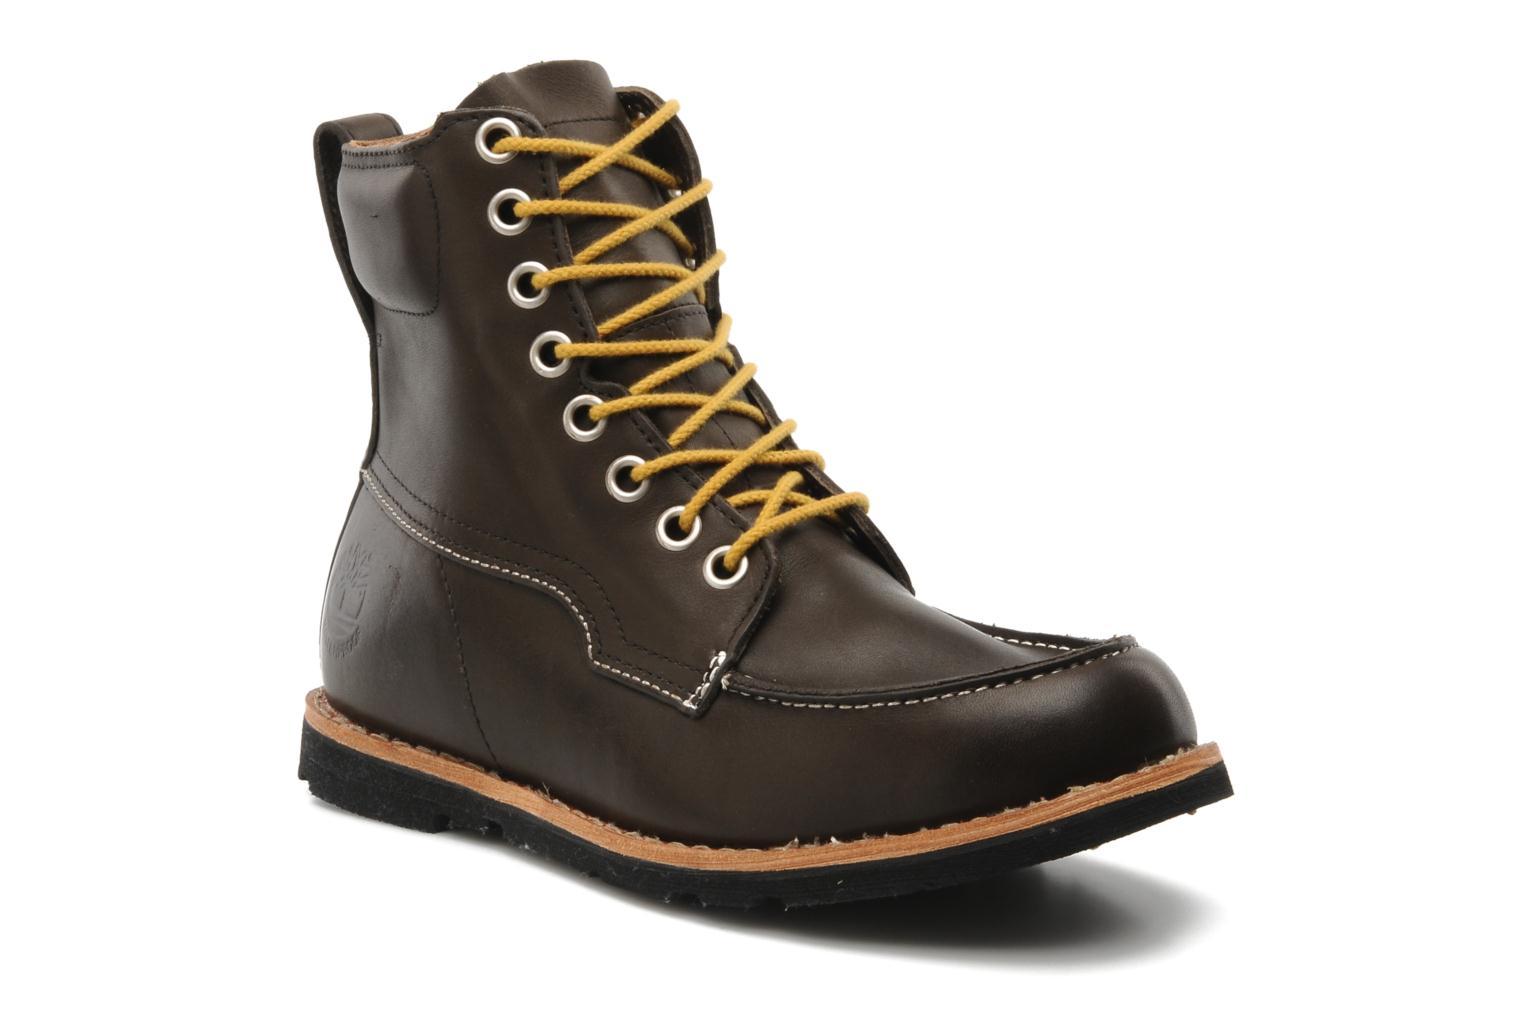 Foto Botines Timberland Earthkeepers original 2.0 rugged 6 moc toe boot Hombre